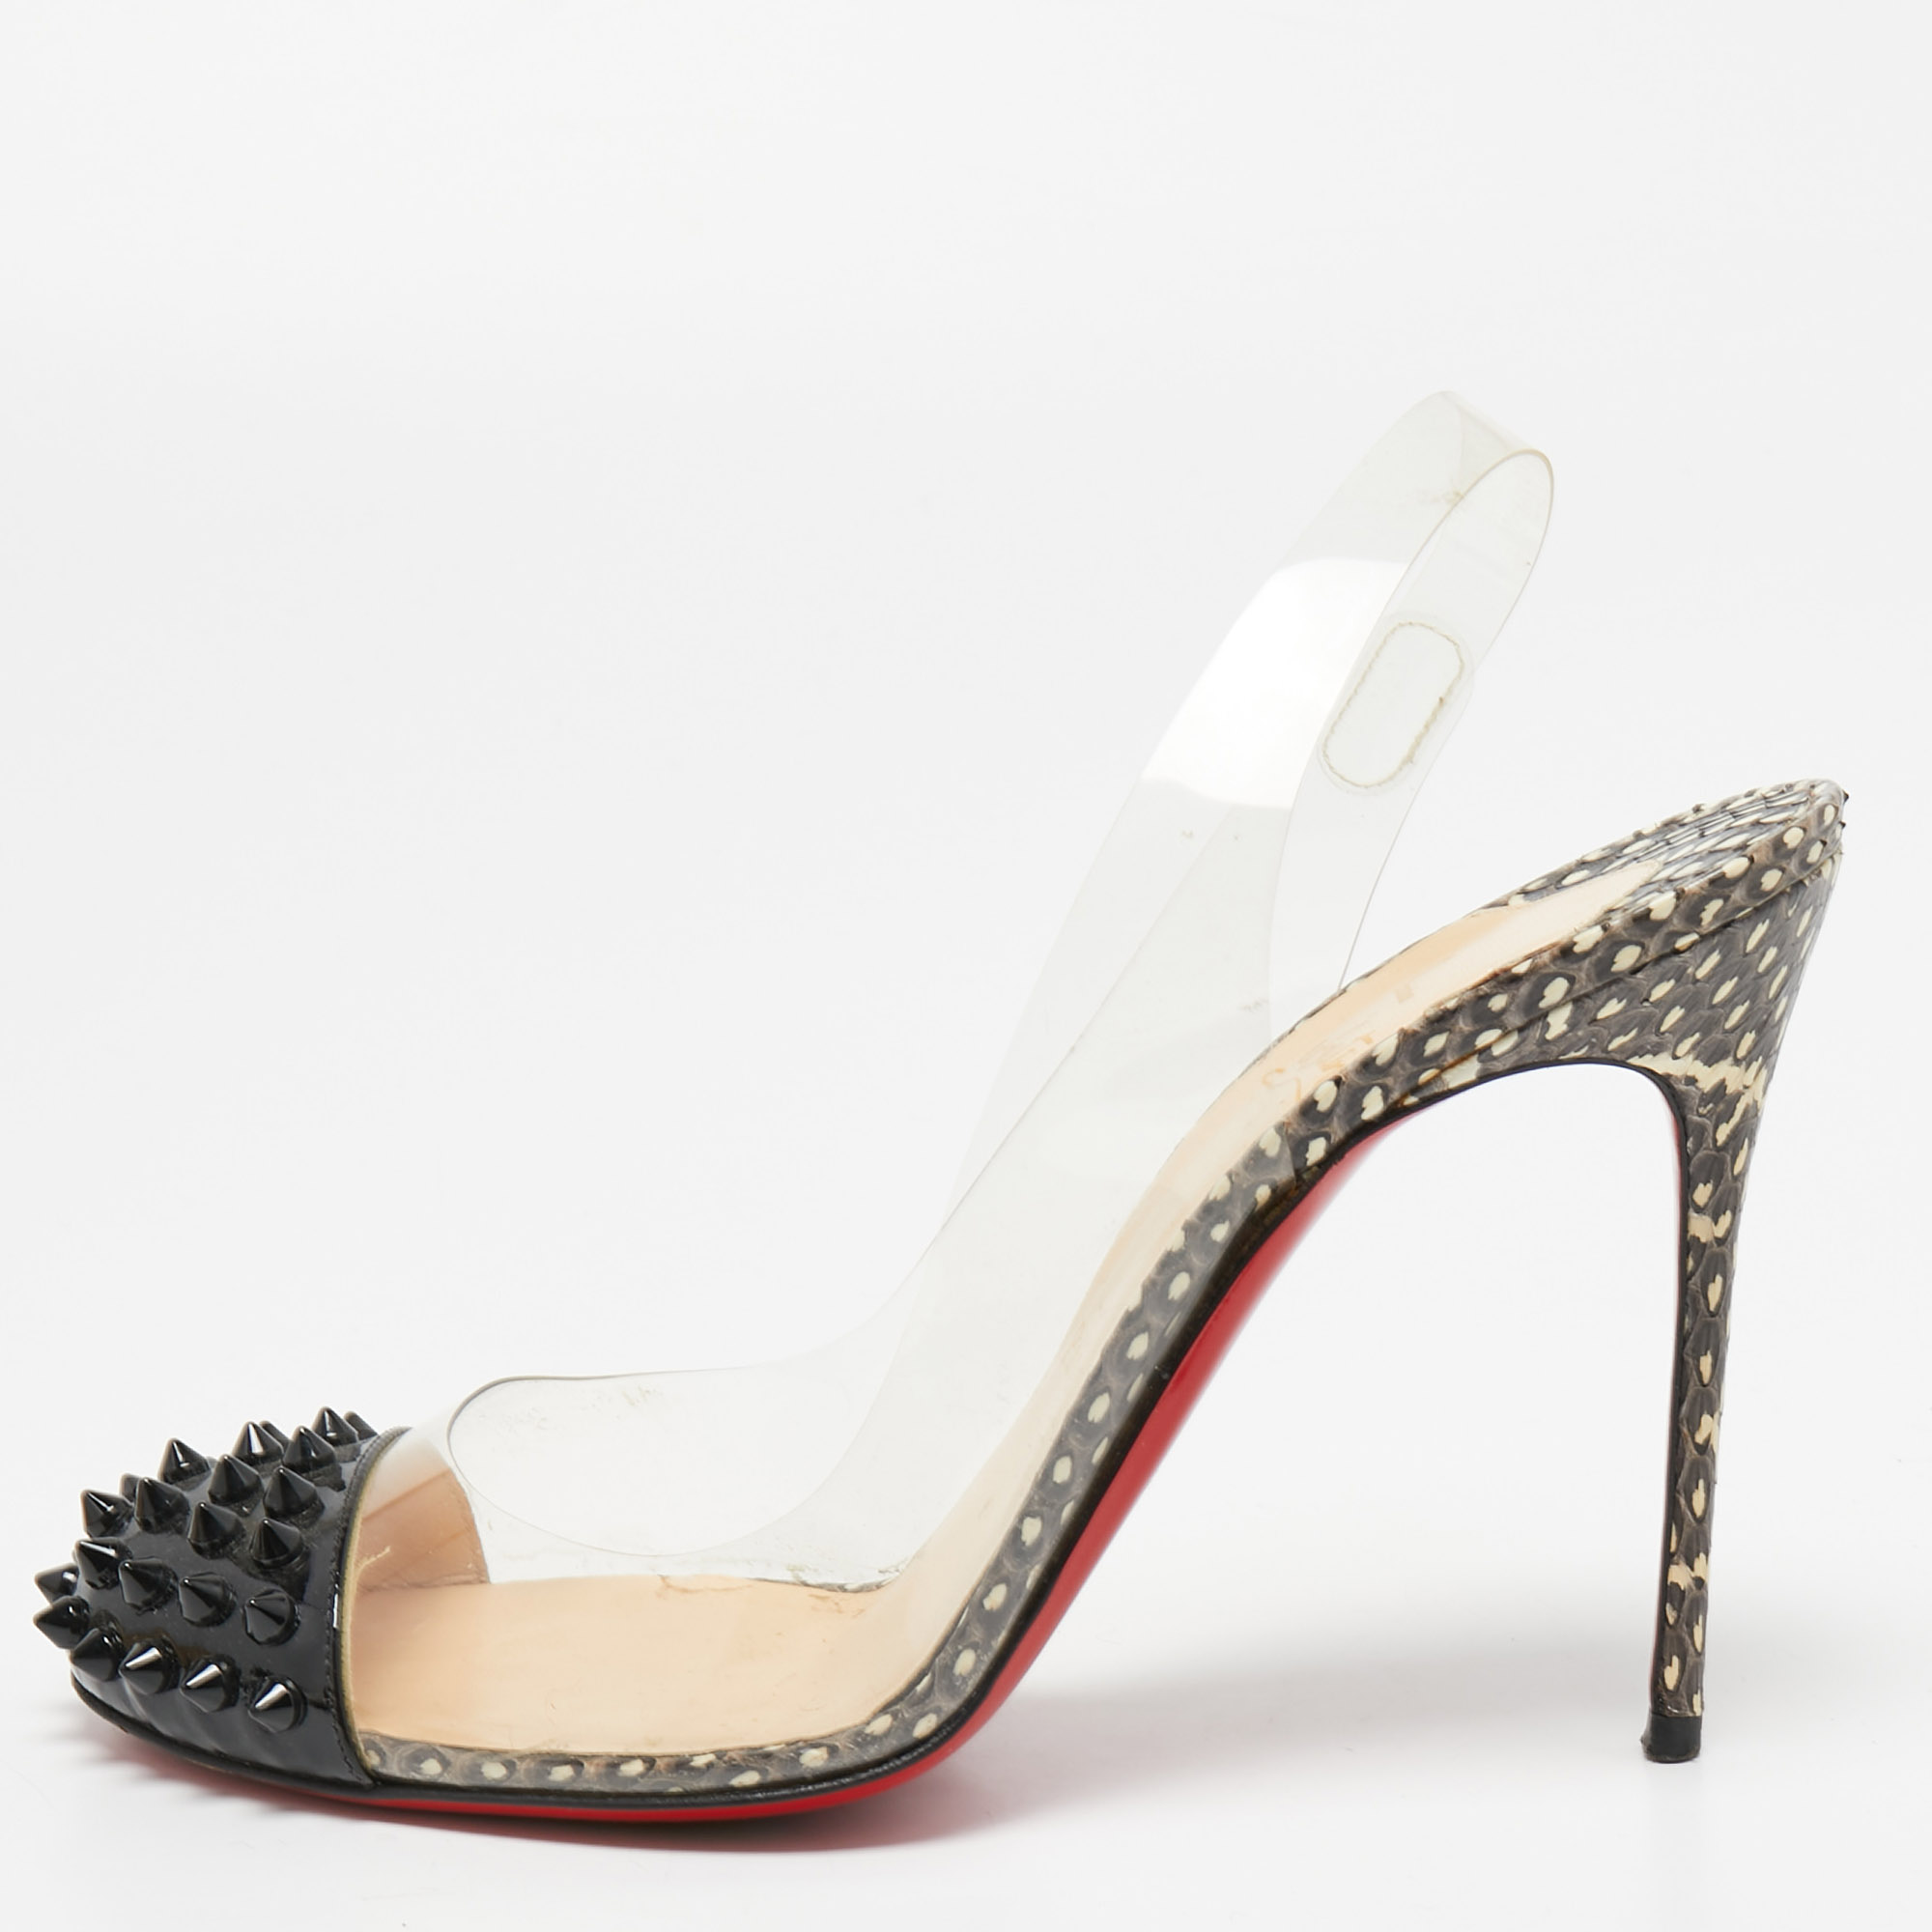 Pre-owned Christian Louboutin Tricolor Pvc And Patent Epoca Slingback Pumps Size 38.5 In Black